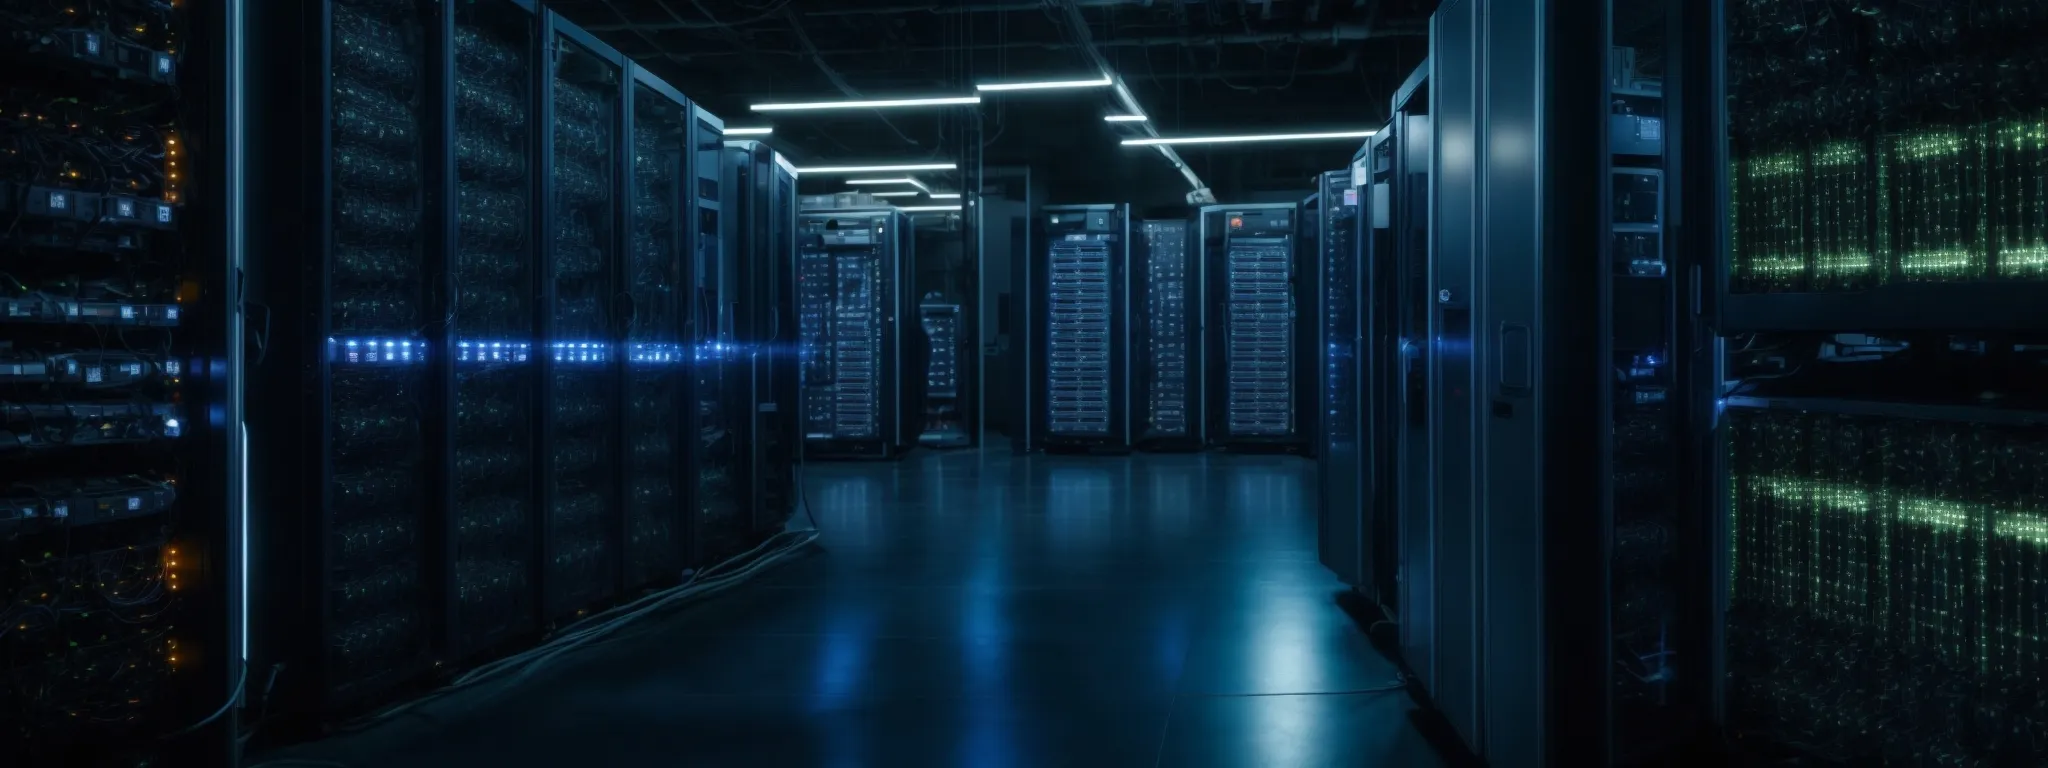 a cluster of servers in a data center with glowing lights represents the power of cloud computing.